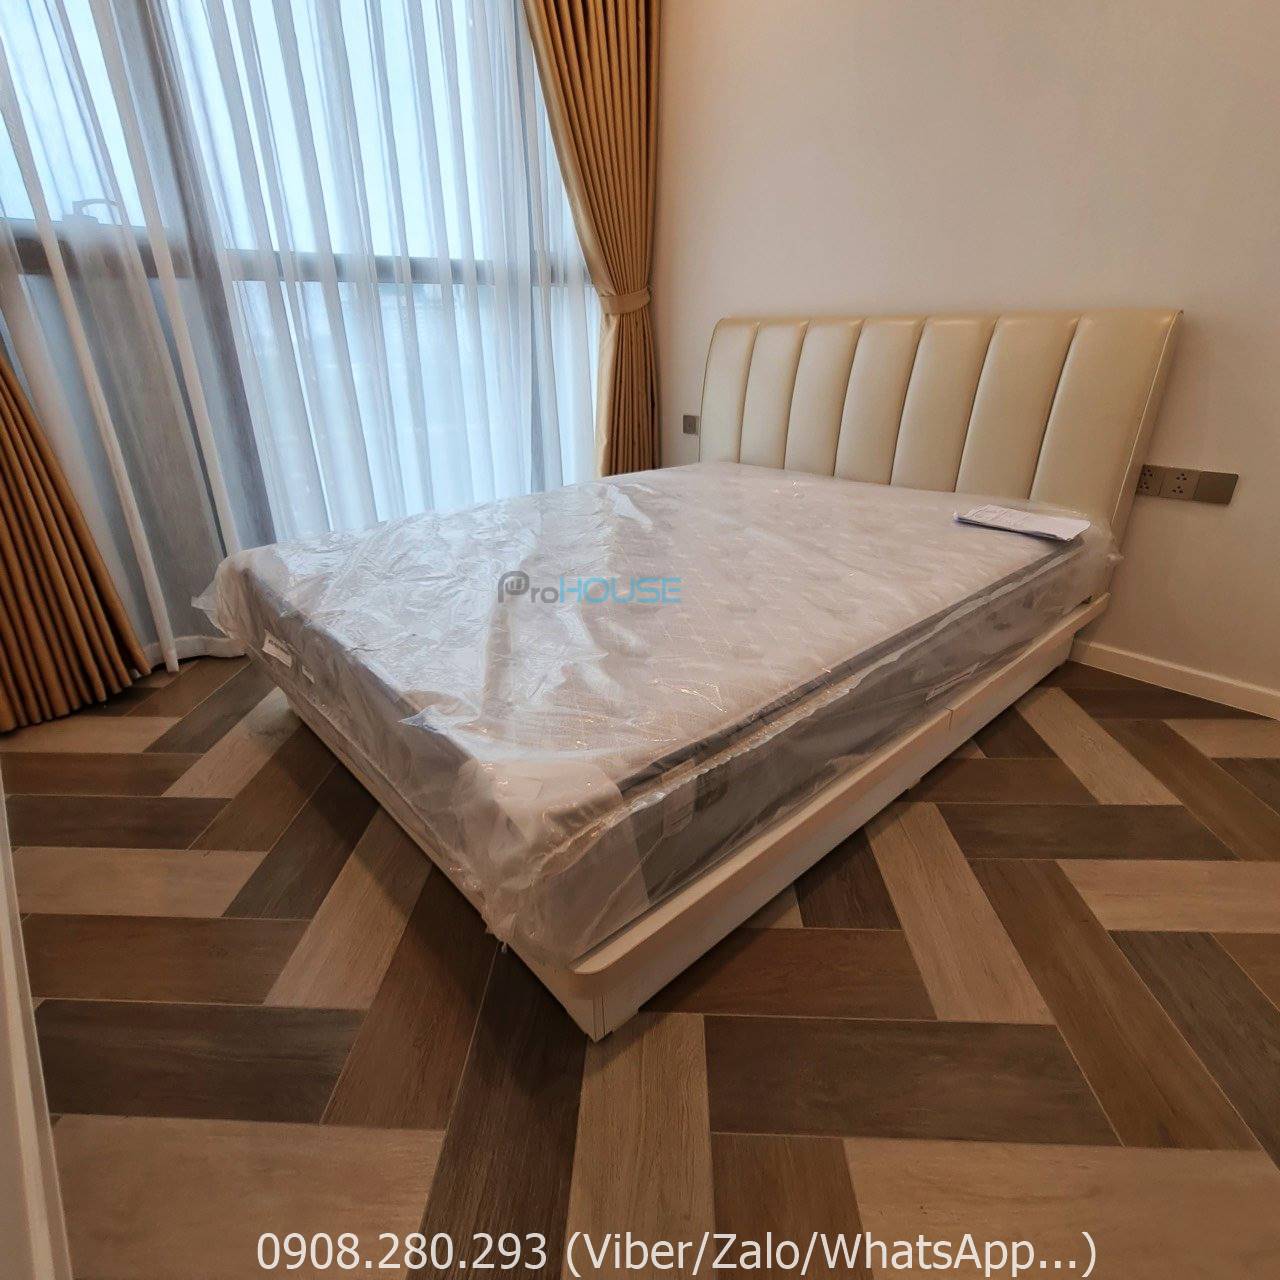 Low price 1 bedroom apartment in The Metropole Thu Thiem for rent with full furniture